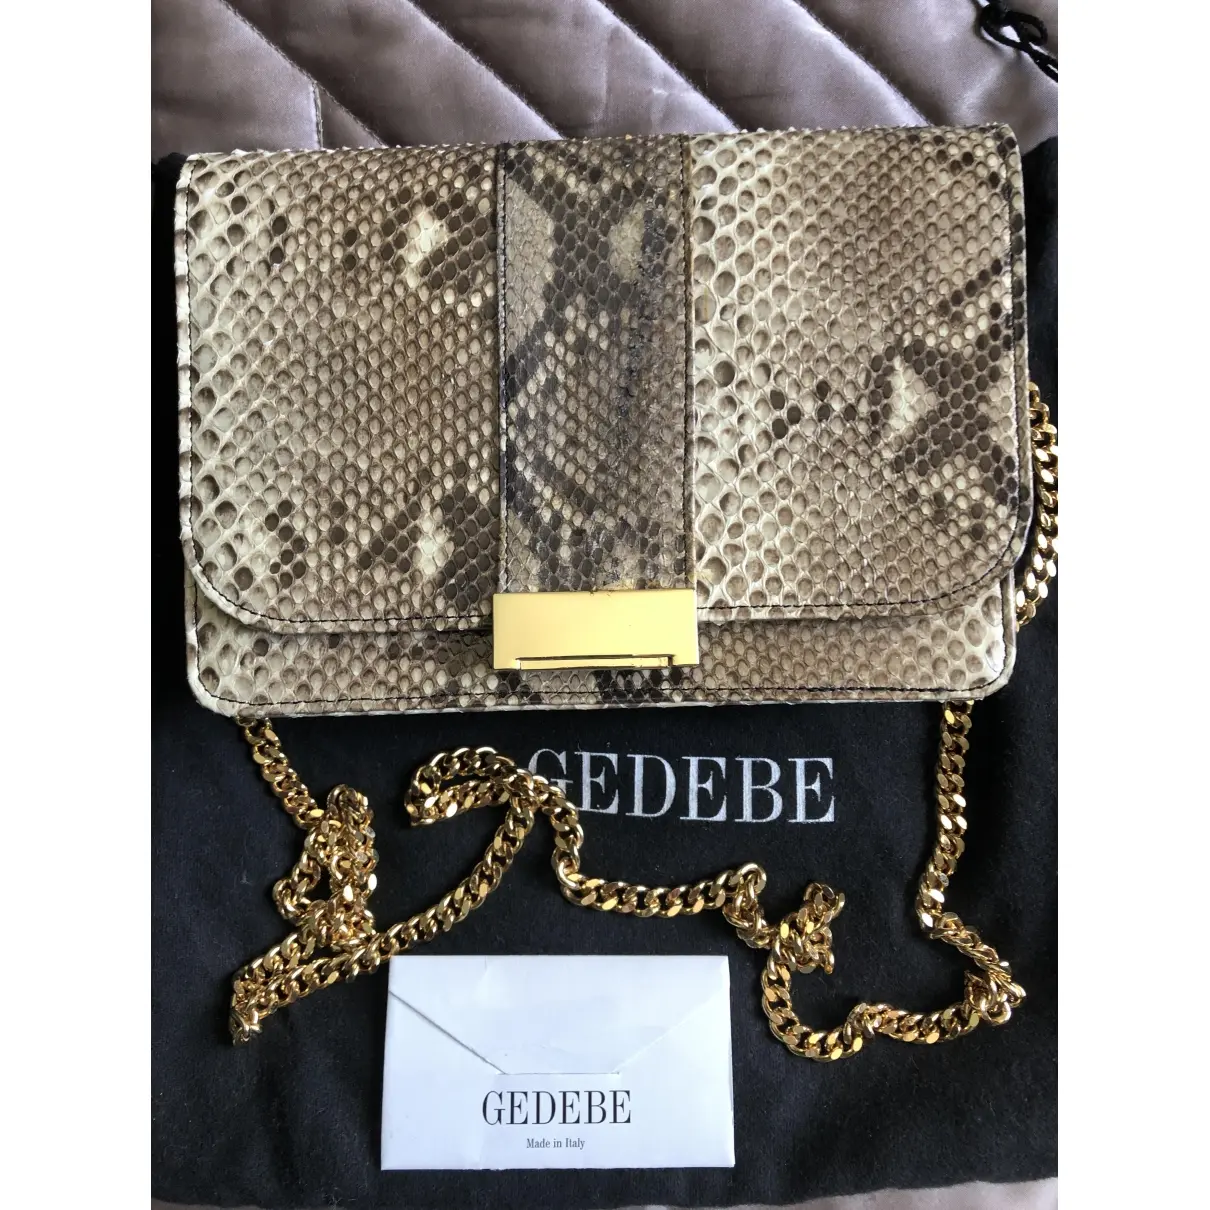 Gedebe Python clutch bag for sale